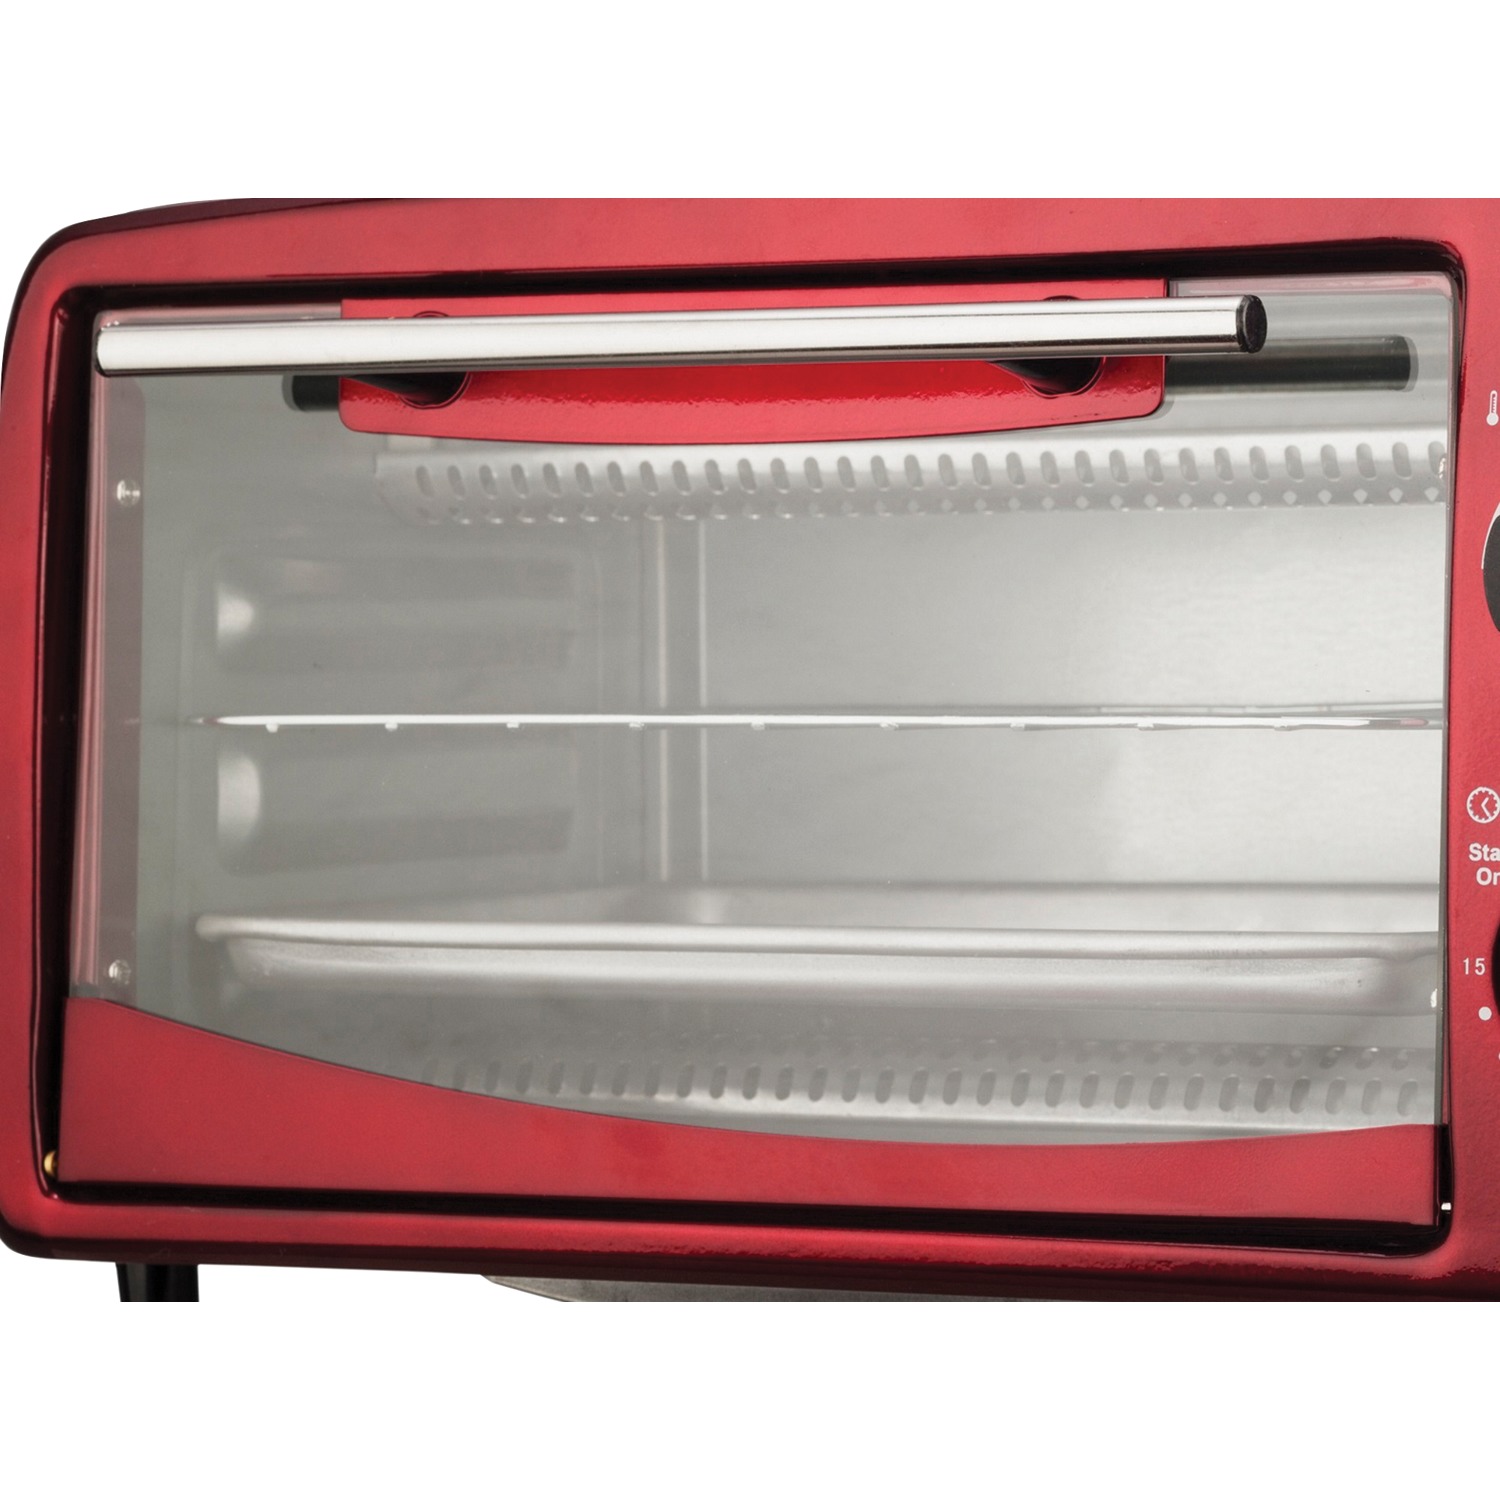 Brentwood Appliances TS-345R Stainless Steel 4 Slice Toaster Oven, Ruby Red - image 2 of 5